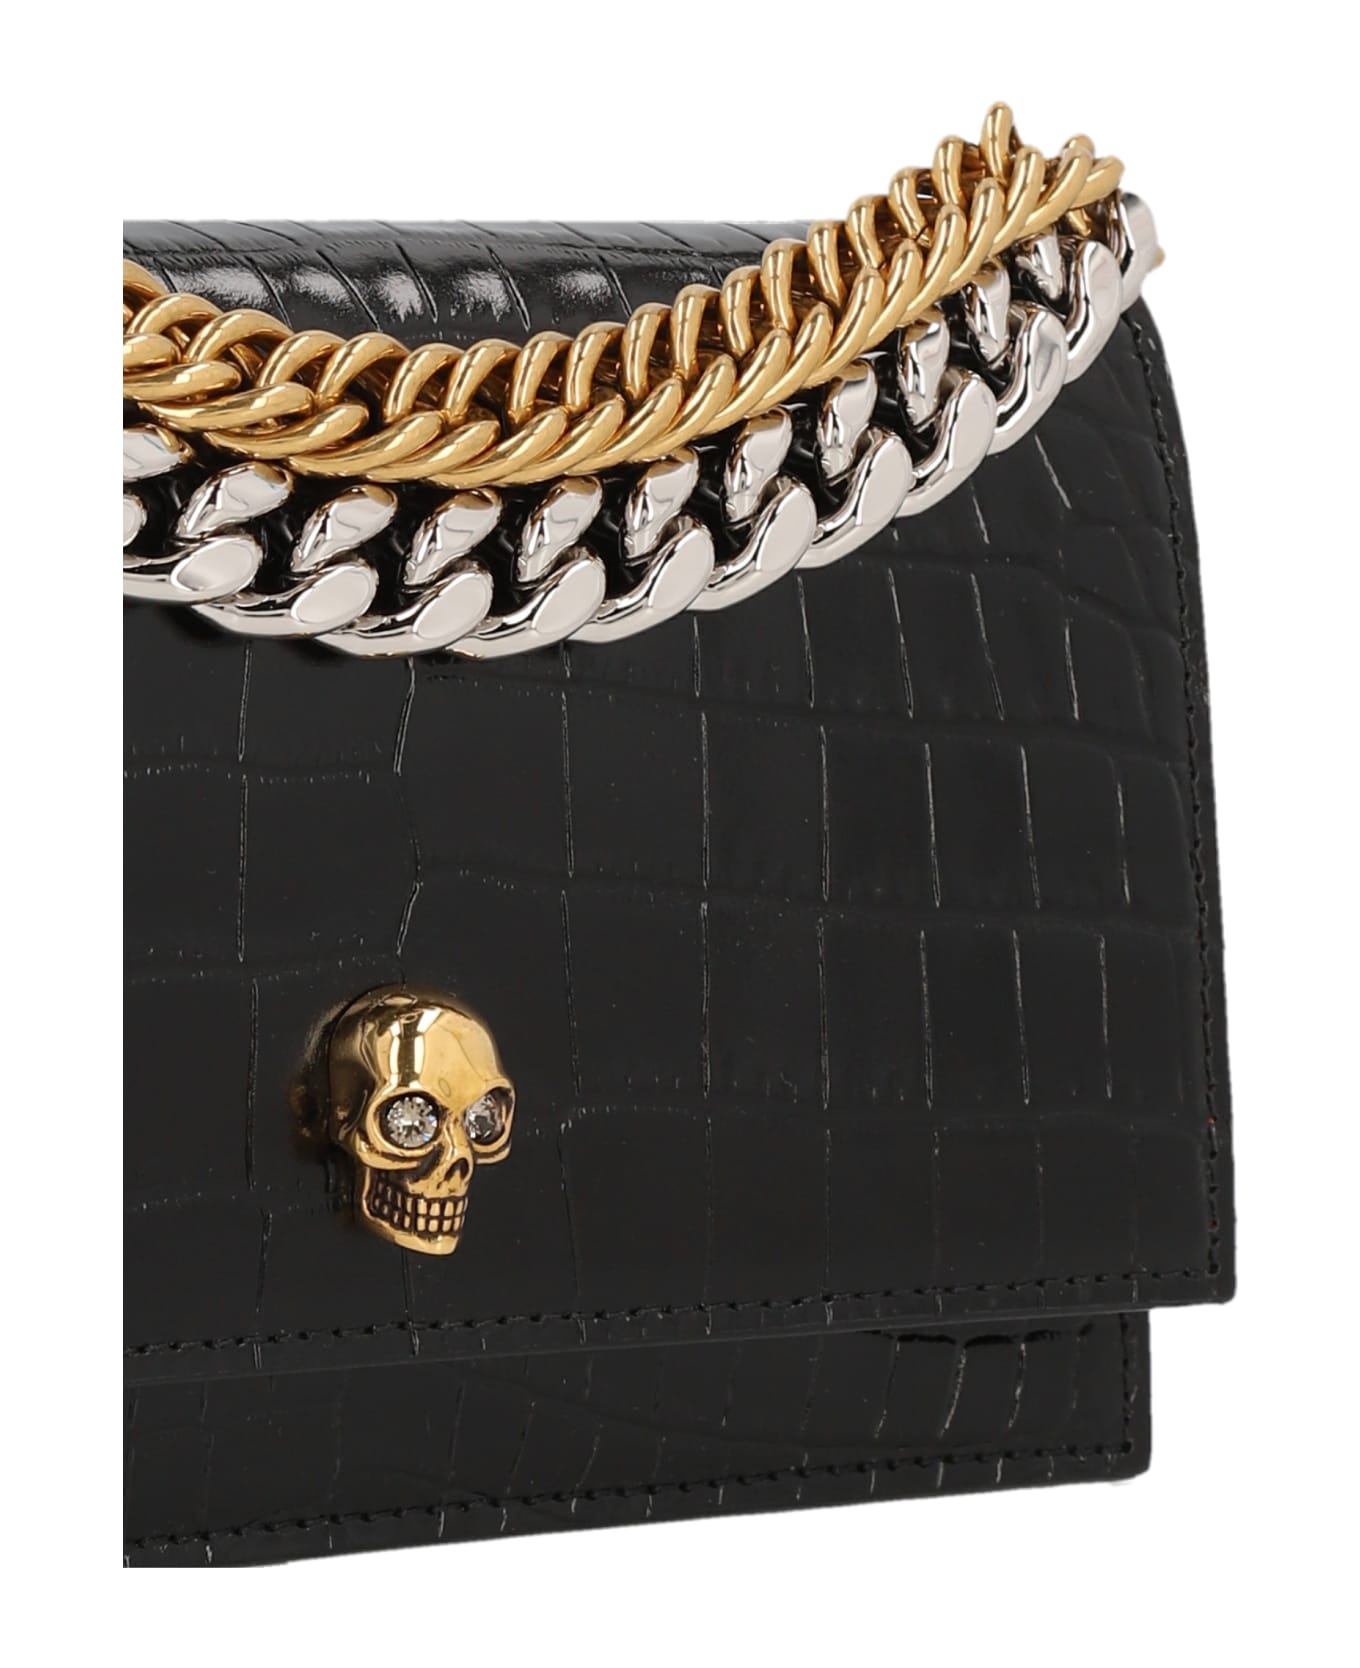 Alexander McQueen Black Small Skull Bag With Chain - Black